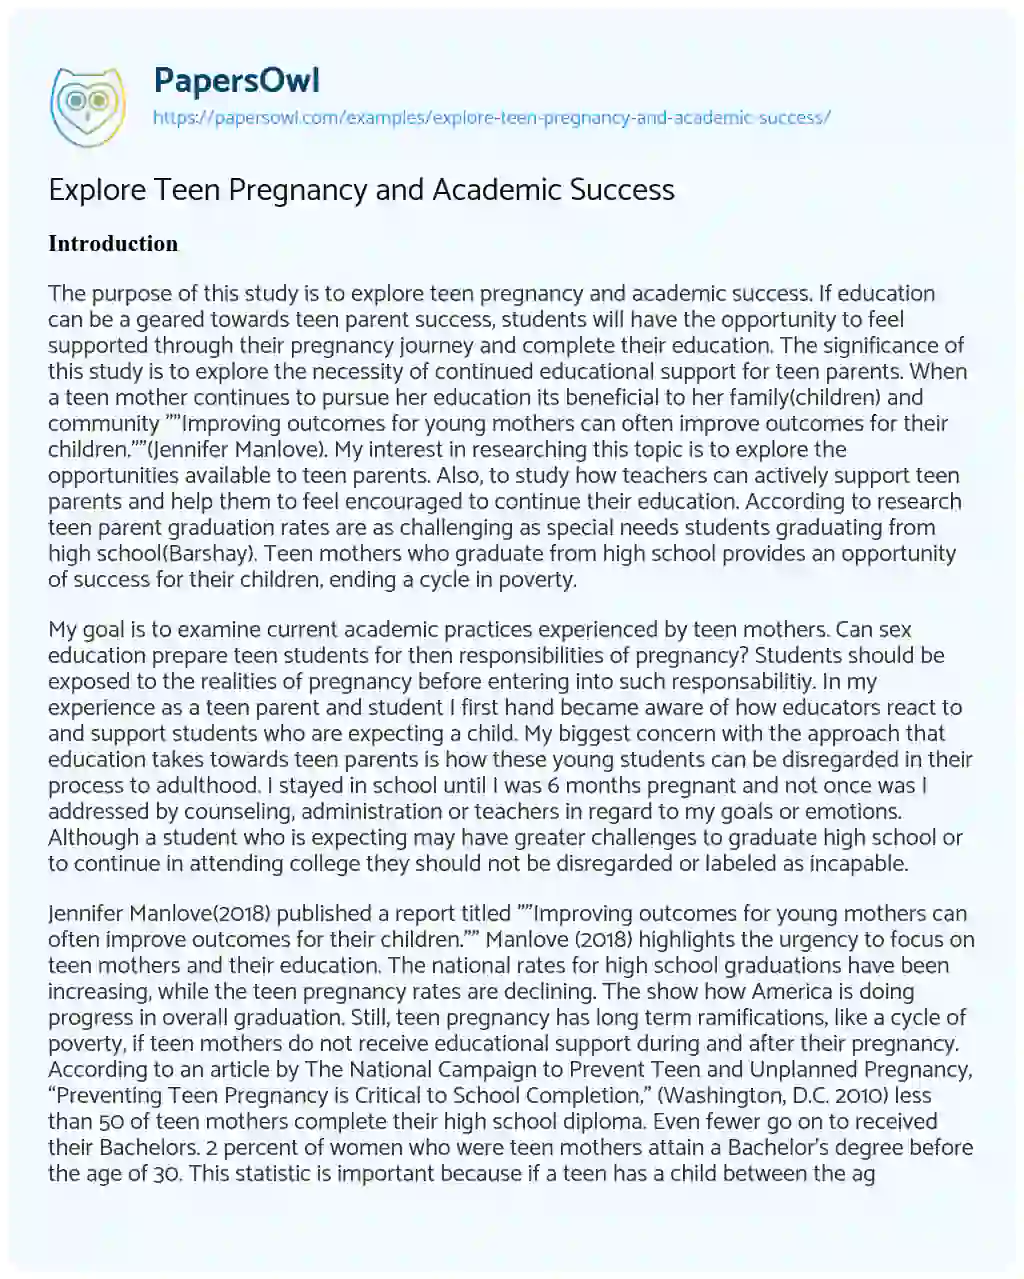 Essay on Explore Teen Pregnancy and Academic Success